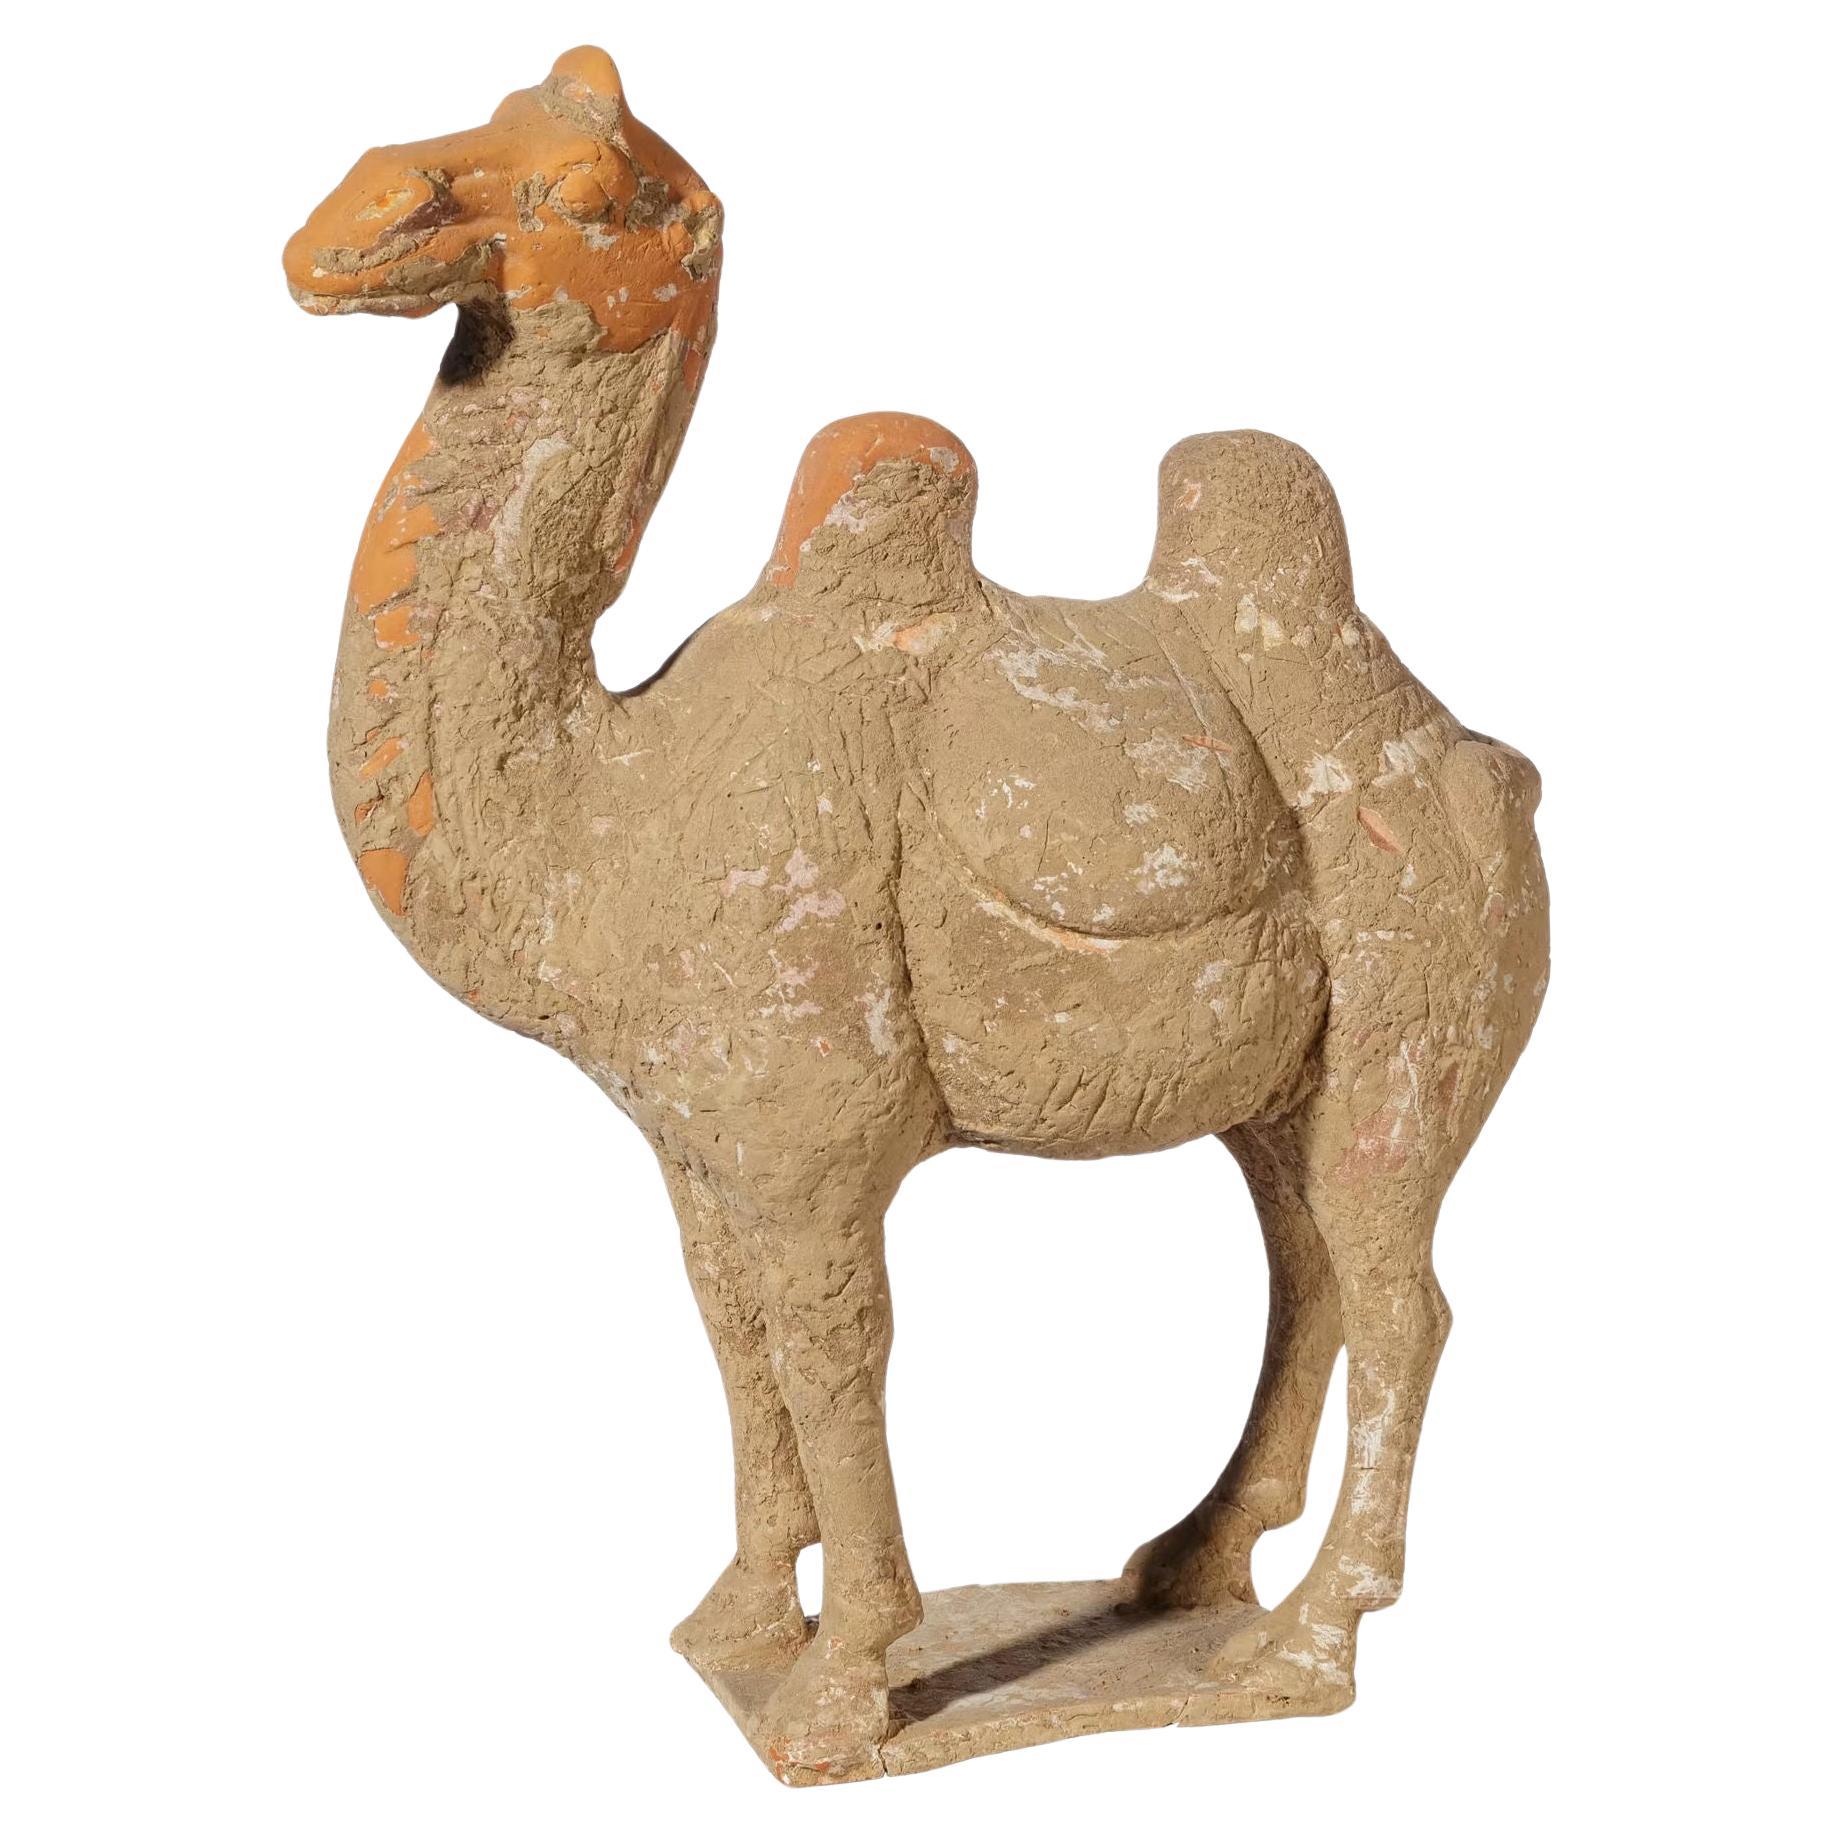 Chinese statuette of a camel